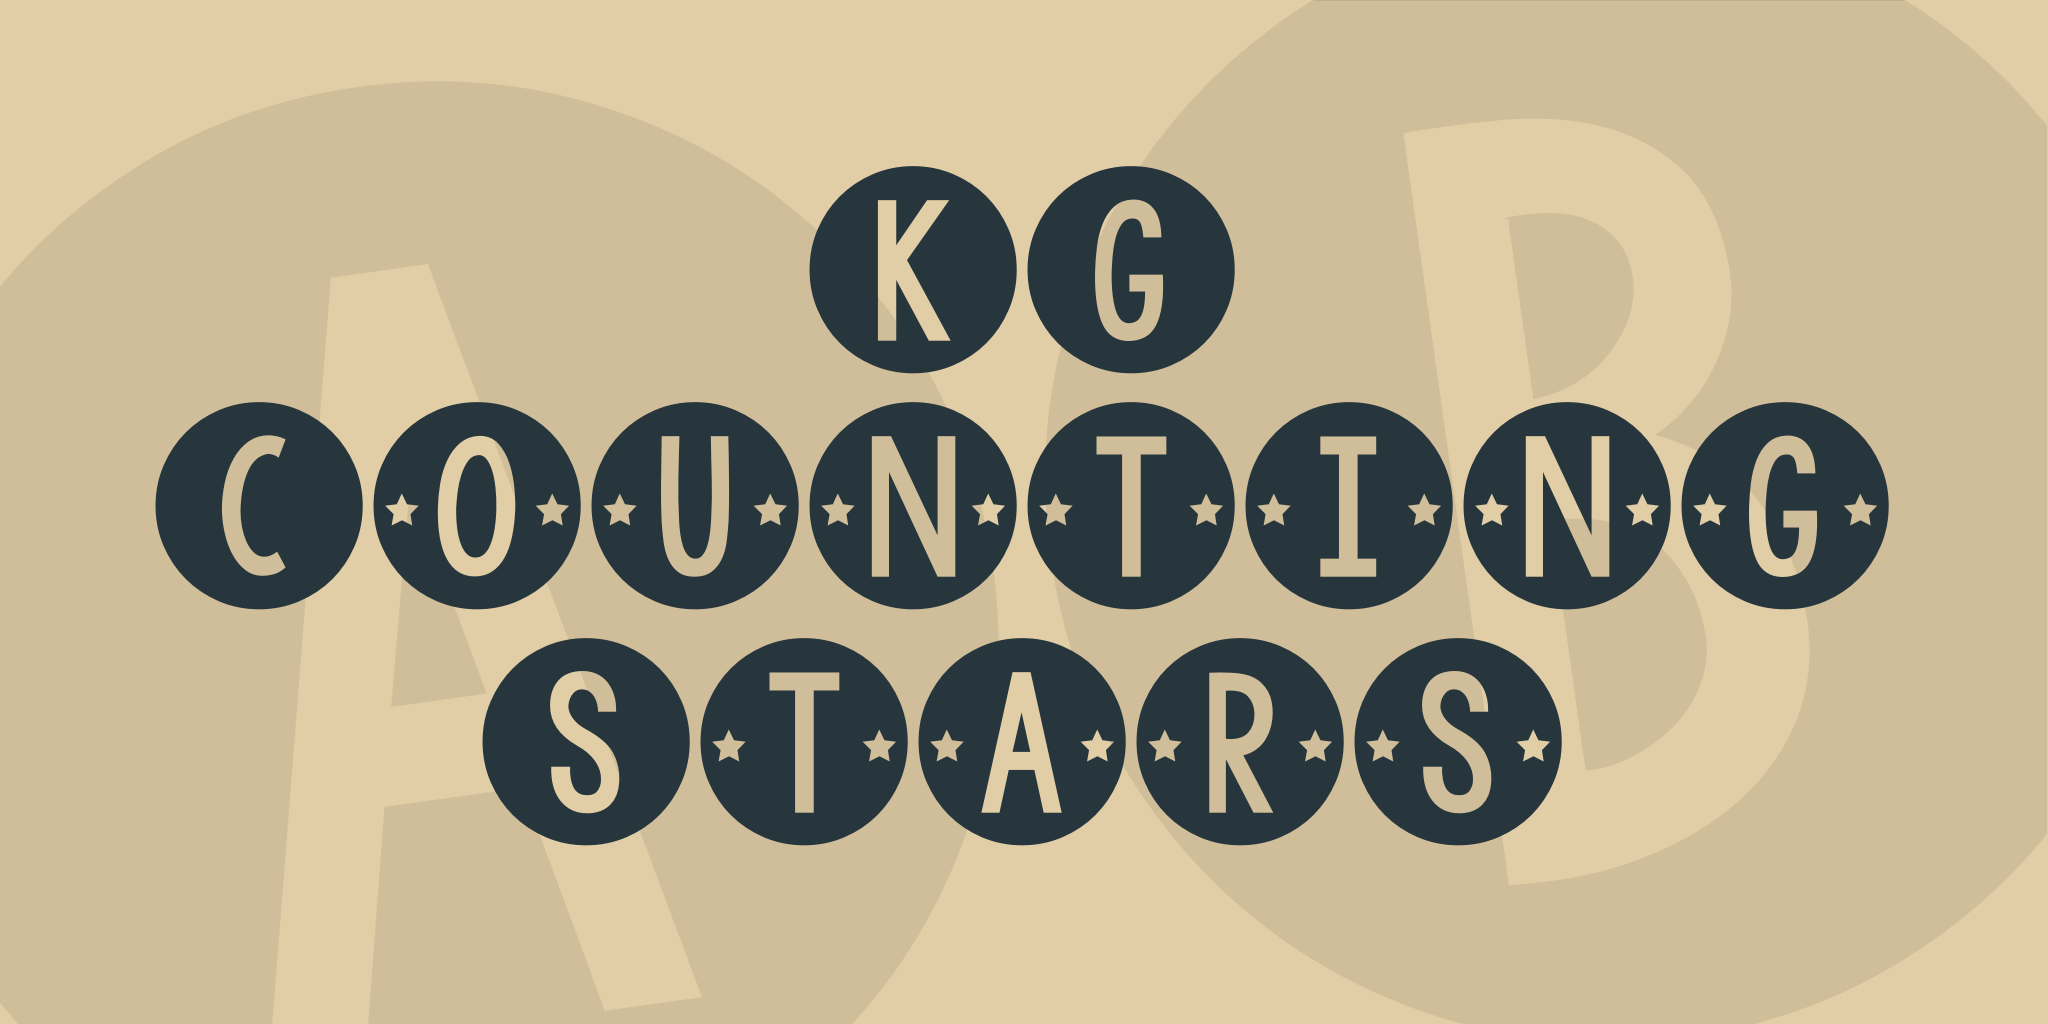 Kg Counting Stars